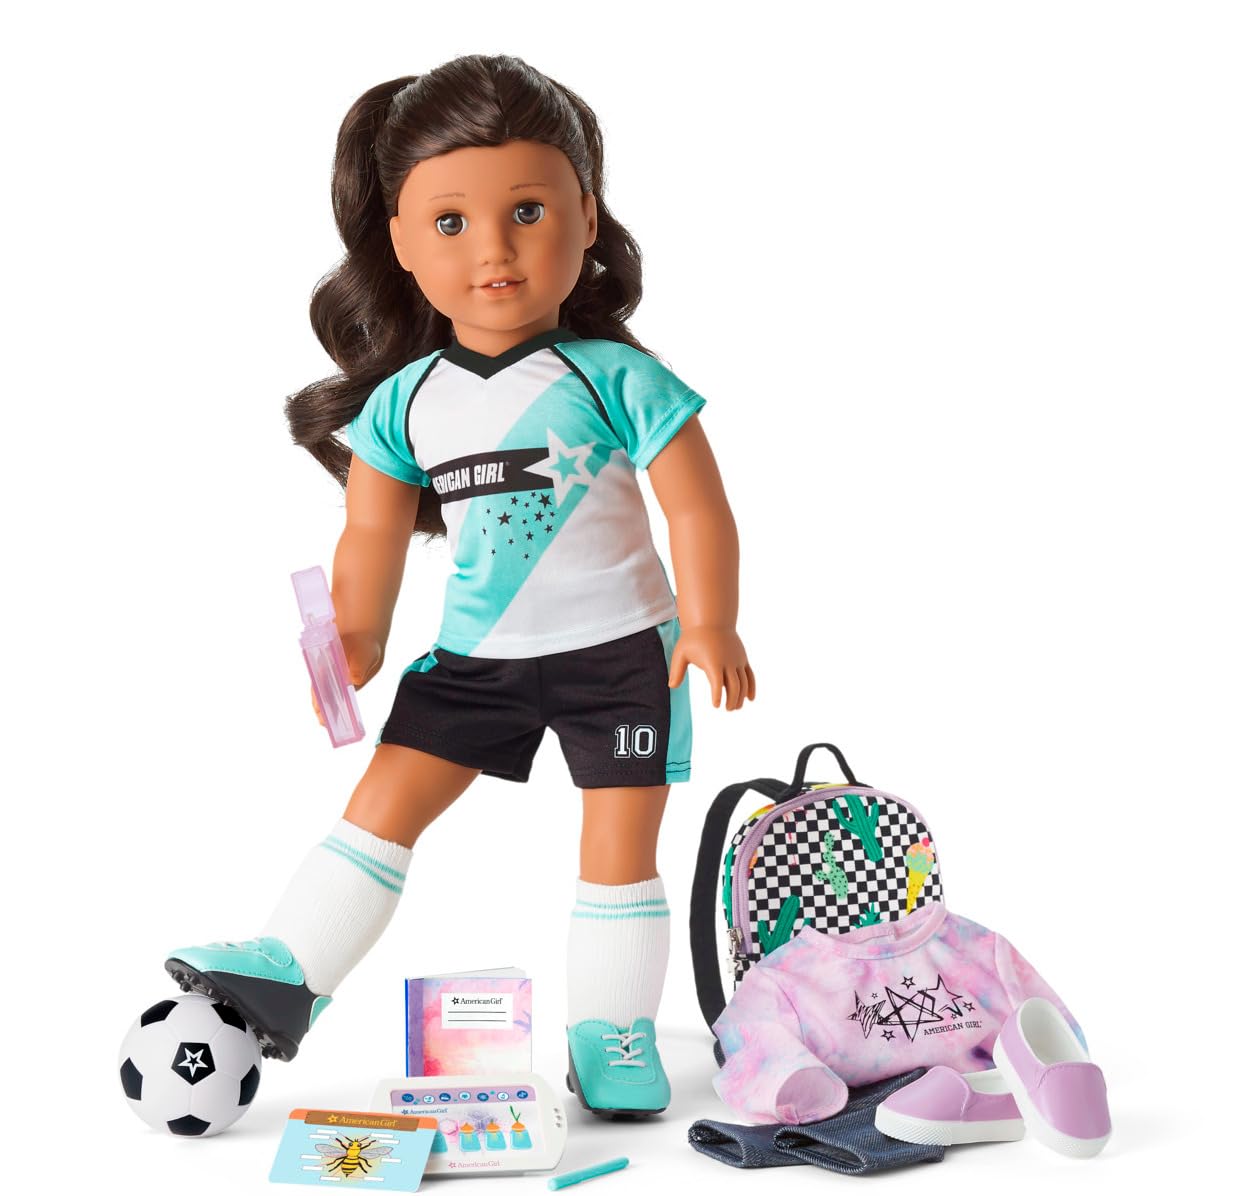 American Girl Truly Me 18-inch Doll 82 and School Day to Soccer Play Set with Brown Eyes, Curly Dark-Brown Hair, tan Skin with Warm Neutral Undertones, tie-dye Sweatshirt, Supplies, Game Gear Ages 6+